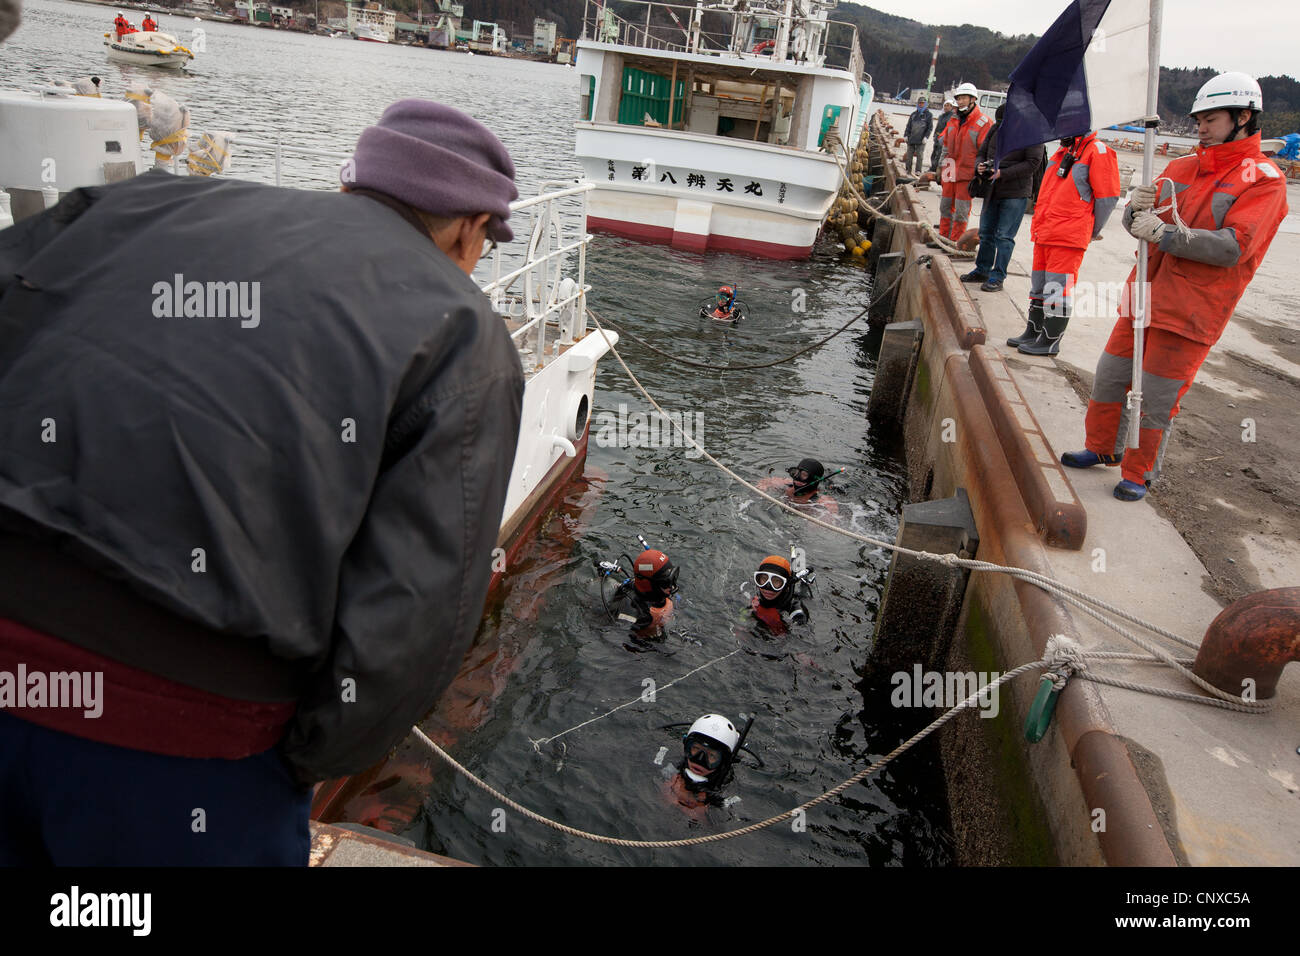 Japanese coast guard search underwater for the bodies of victims of the March2011 tsunami, in Kesennuma harbour, Tohoku, Japan. Stock Photo